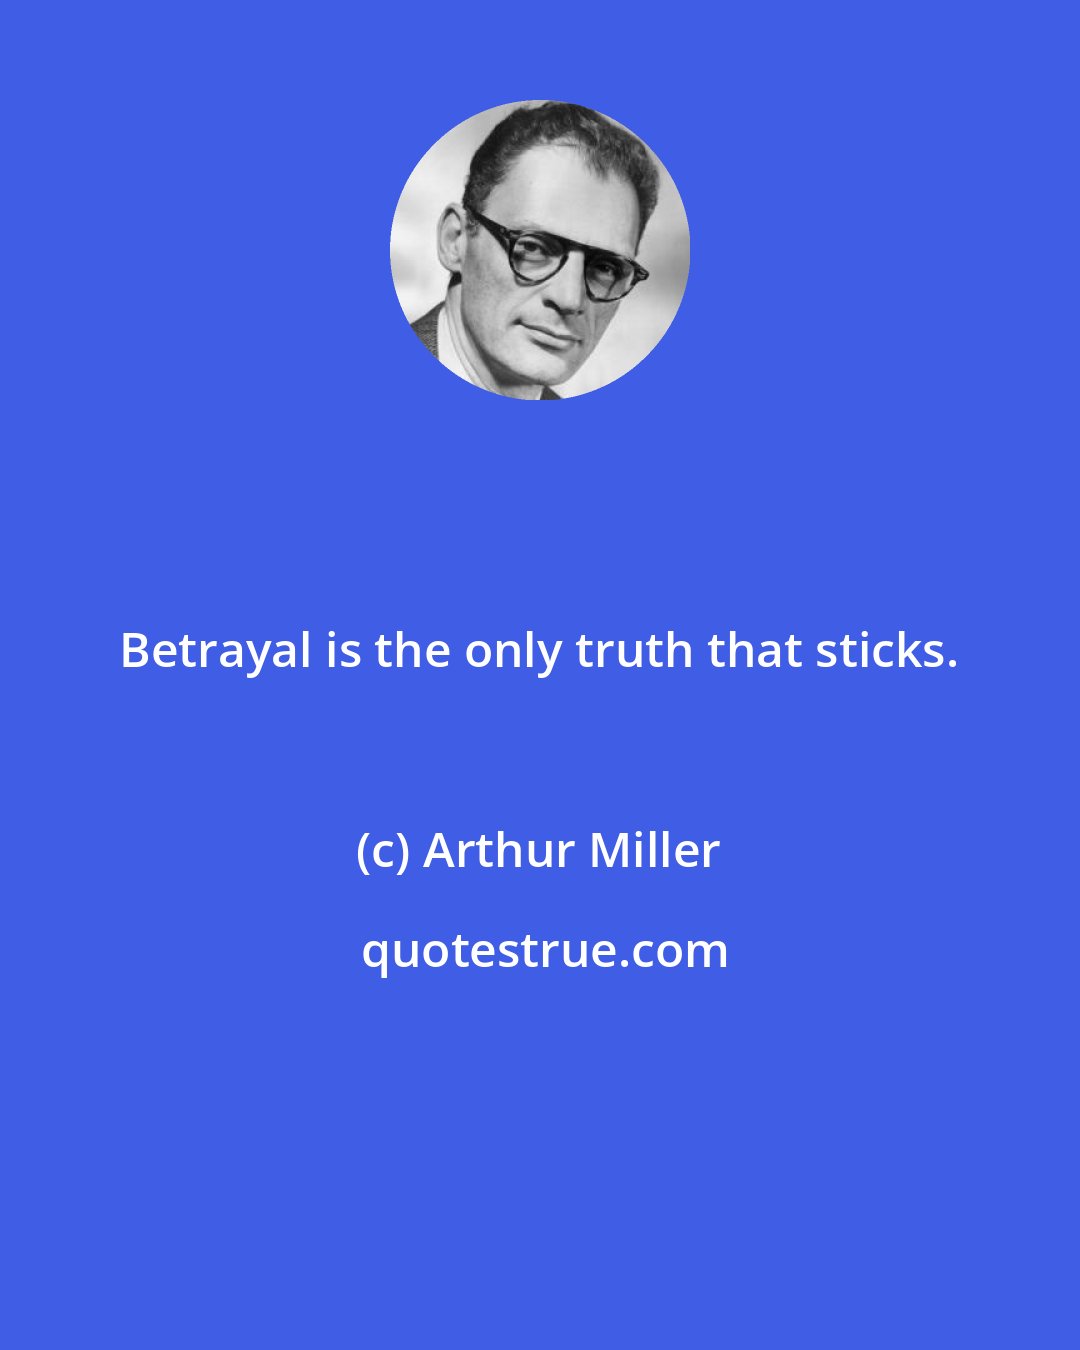 Arthur Miller: Betrayal is the only truth that sticks.